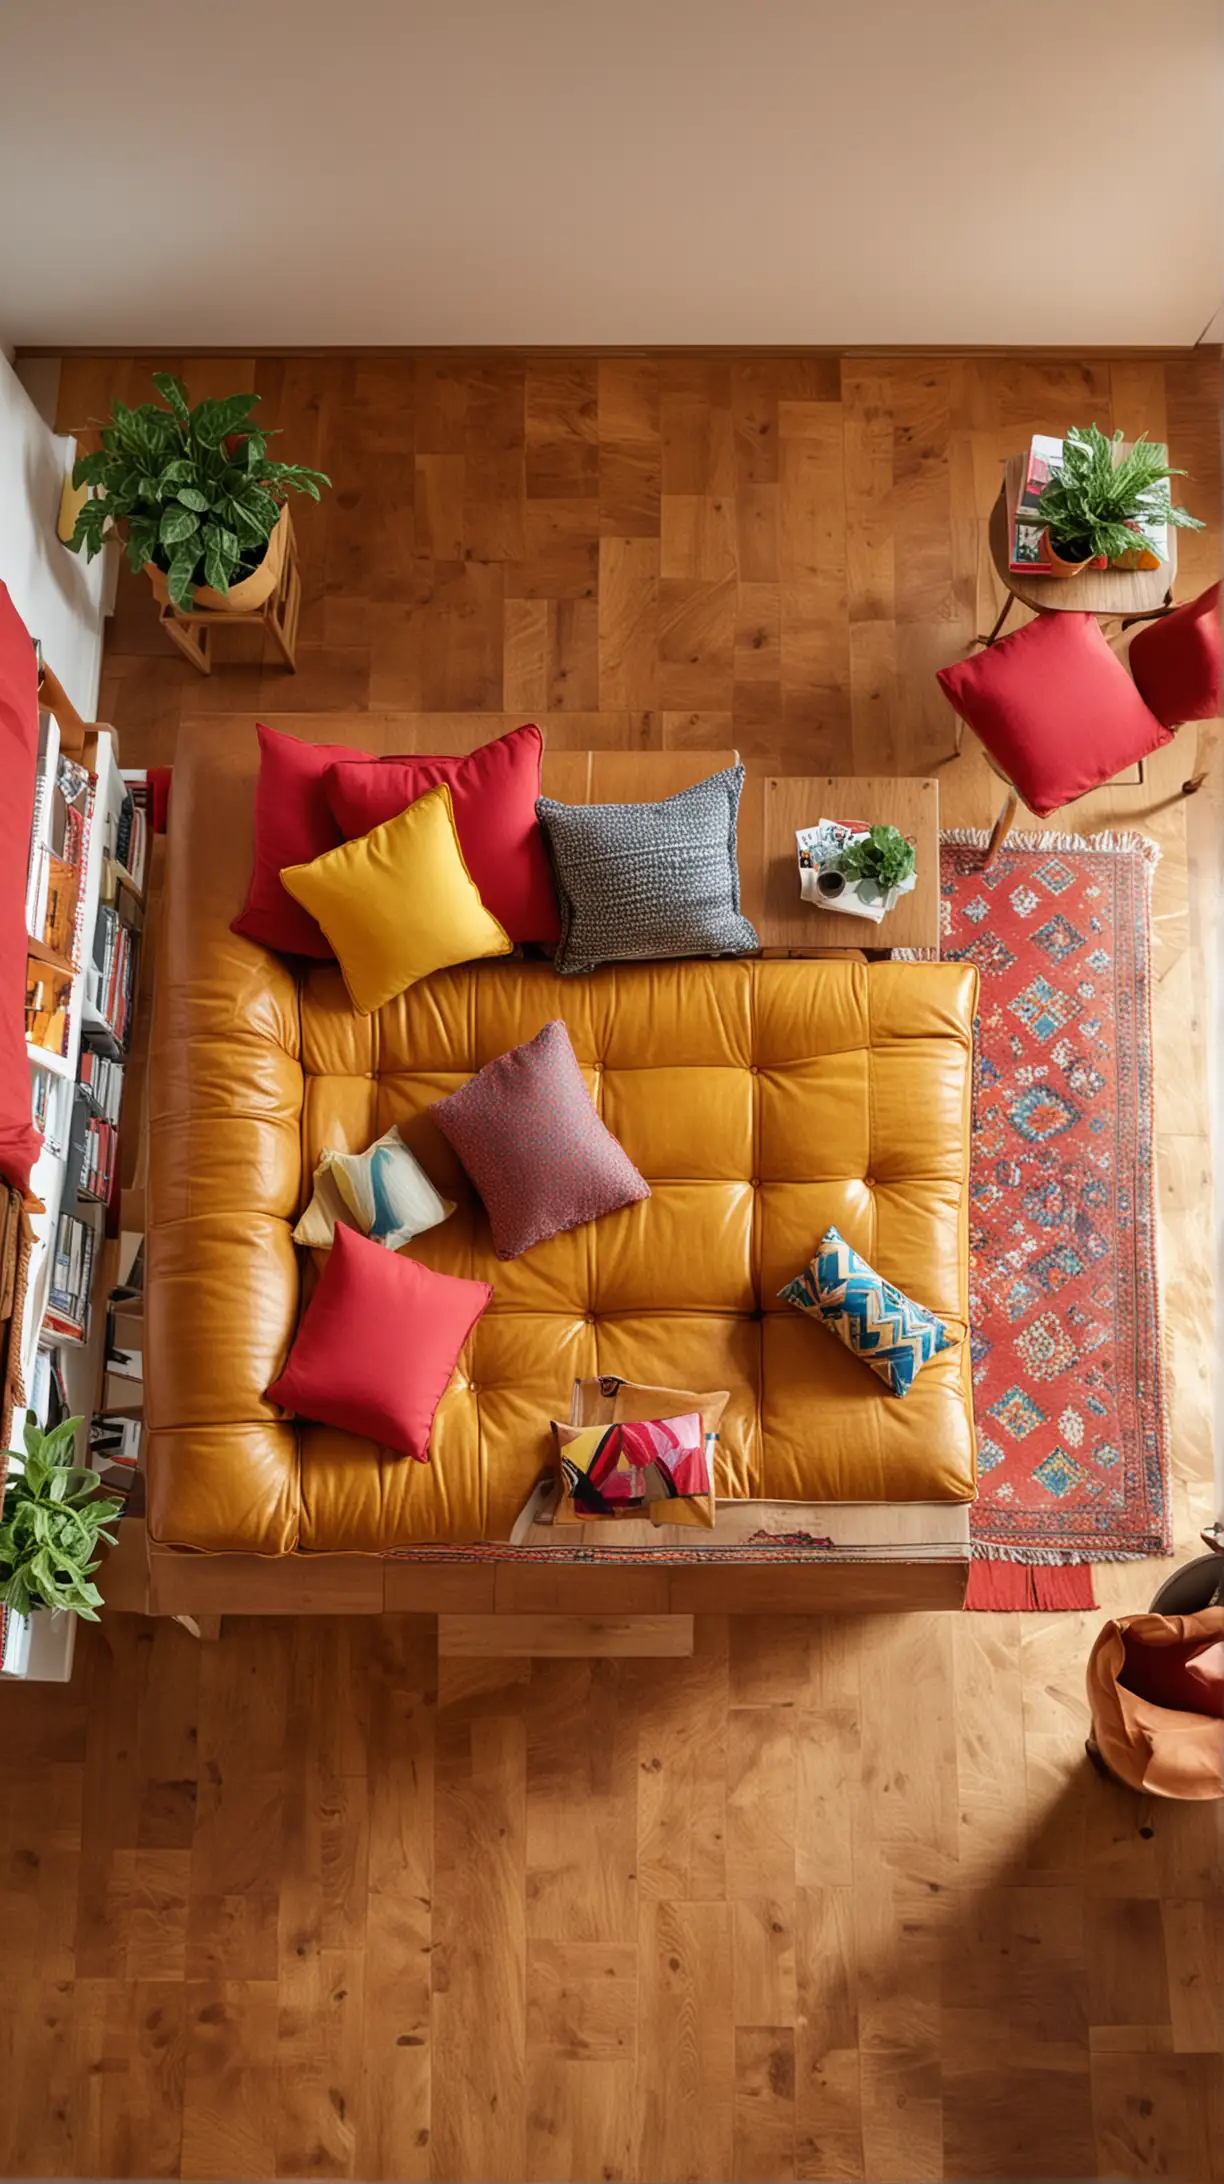 A vibrant living room with a cognac leather couch and pops of bright colors such as red cushions or a yellow throw. The space should be lively and cheerful, with a stylish and energetic feel.